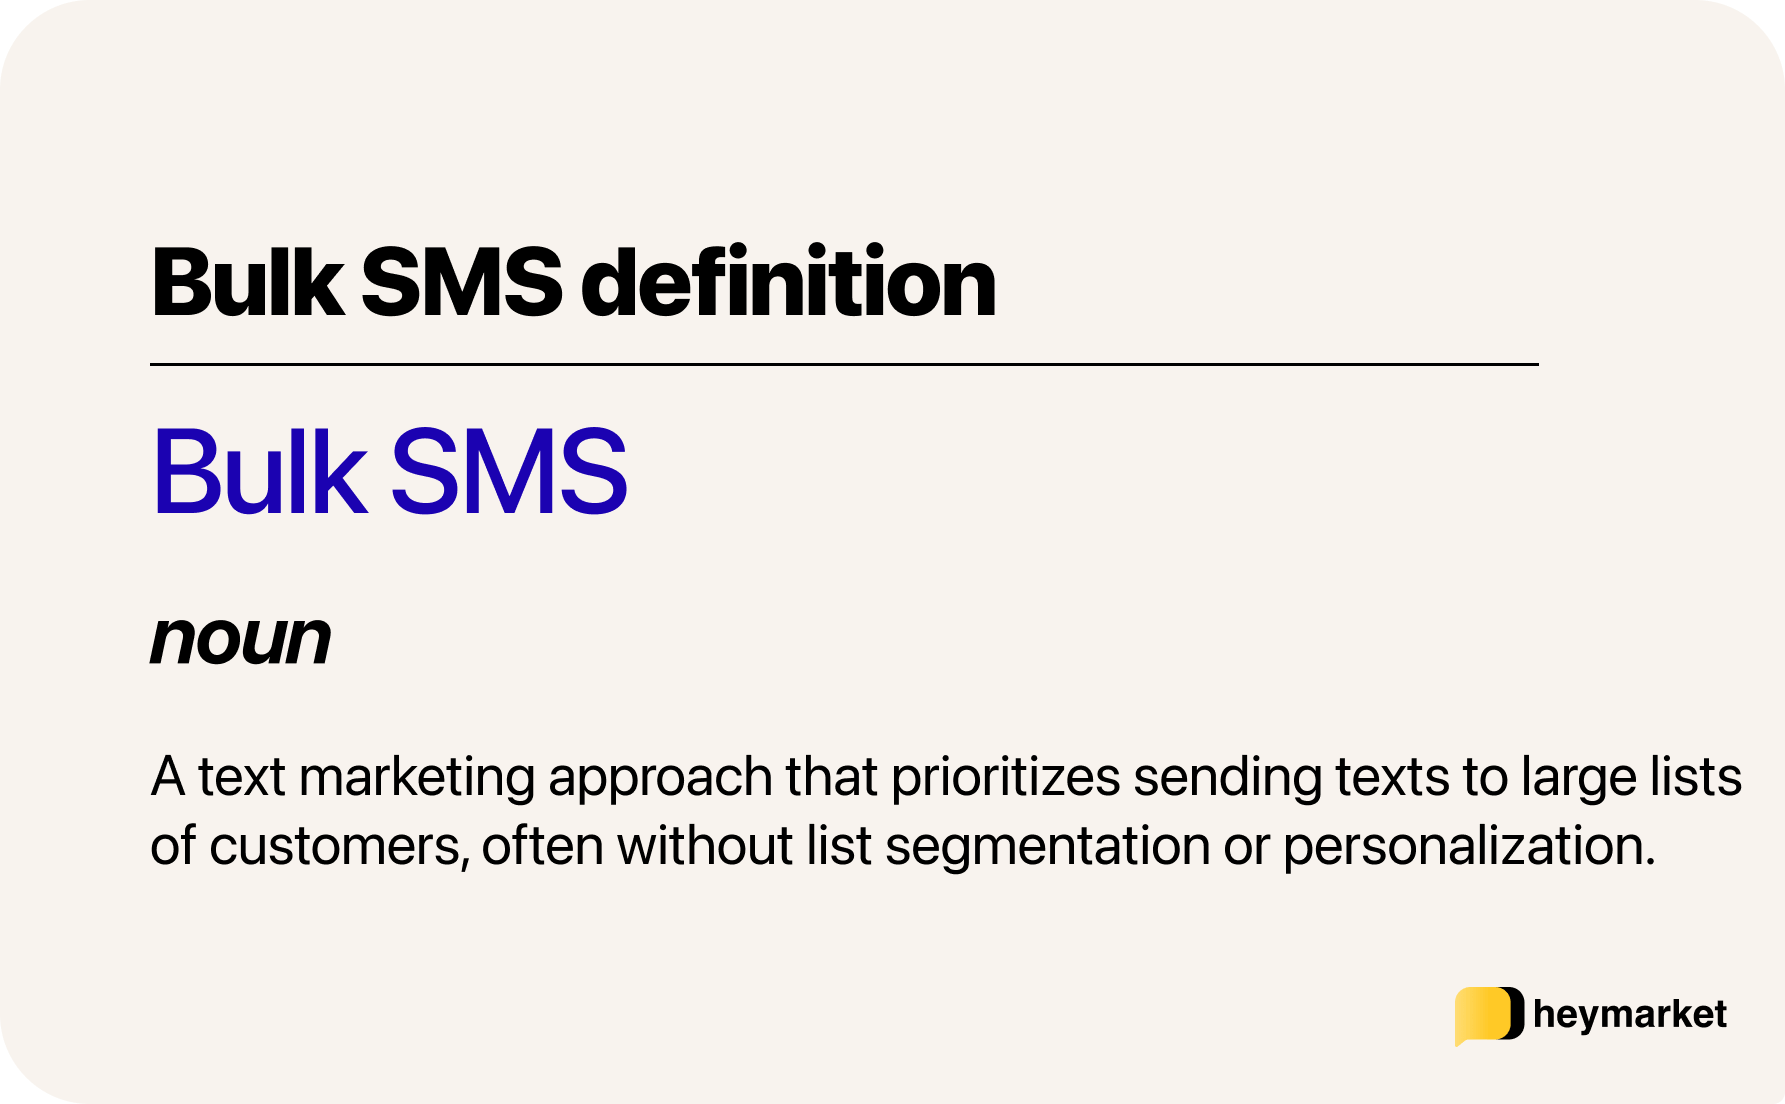 Definition of bulk SMS: A text marketing approach that prioritizes sending texts to large lists of customers, often without list segmentation or personalization.